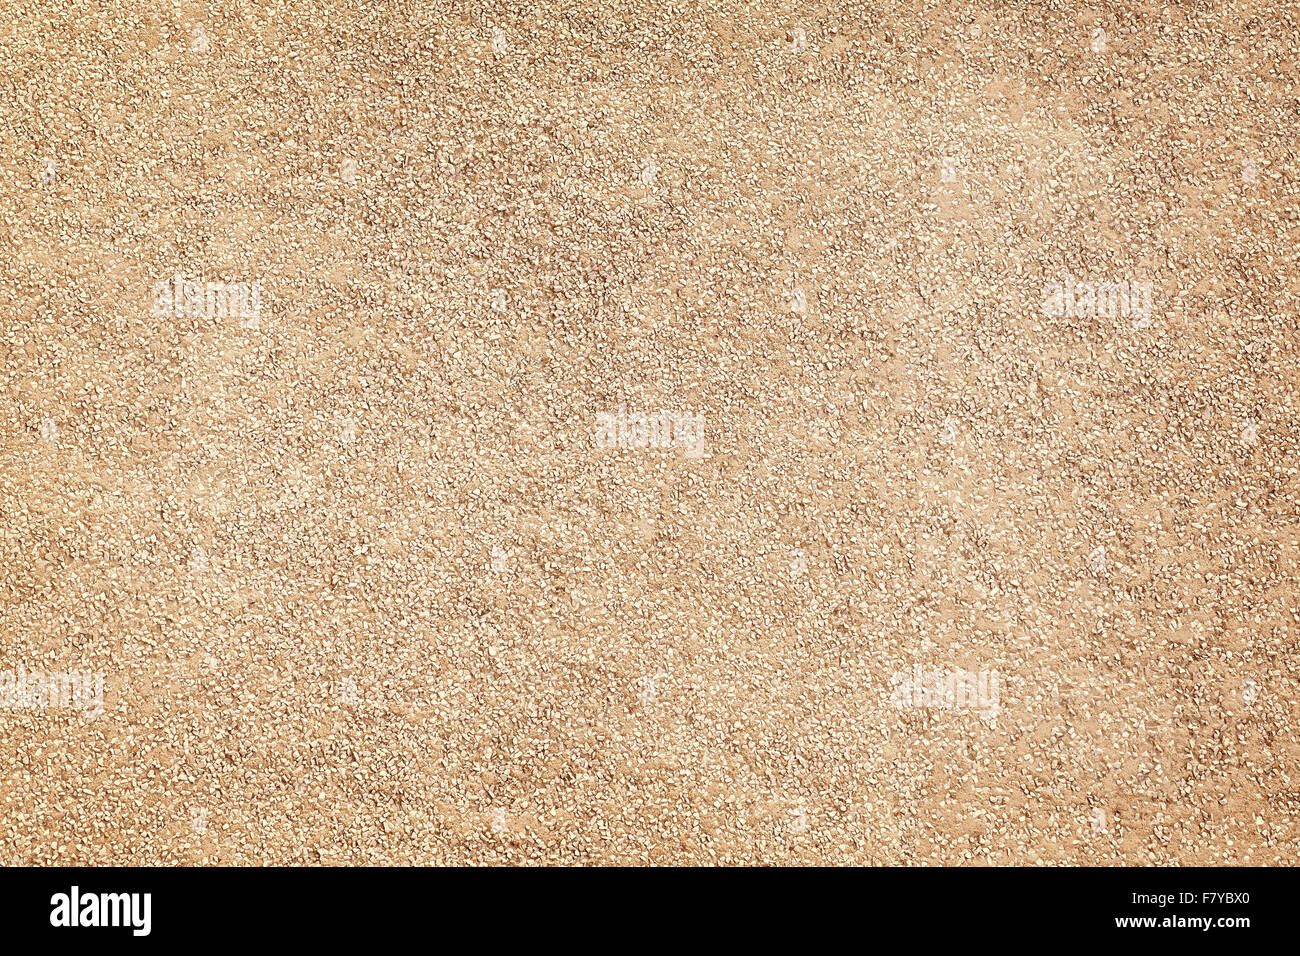 Gravel concrete wall texture or background. Stock Photo